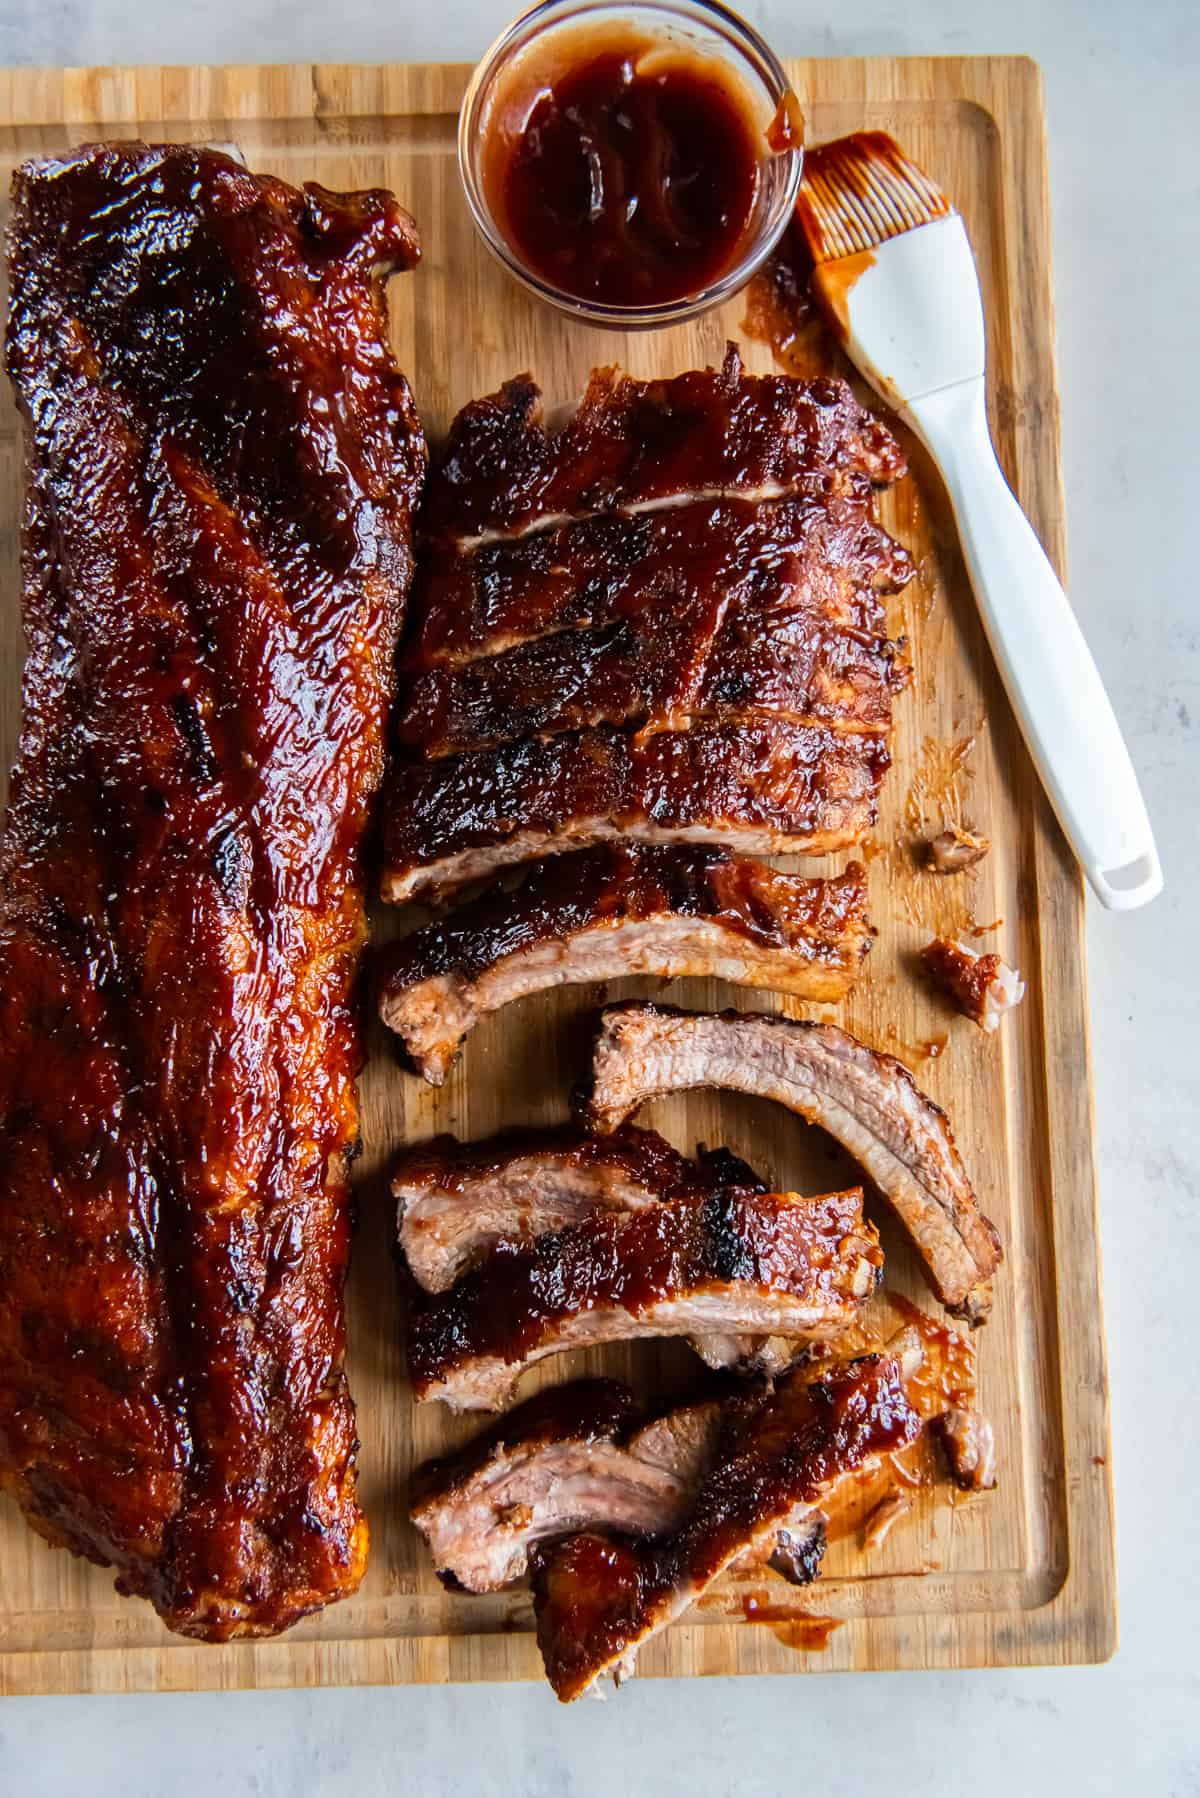 oven-baked-baby-back-ribs-17